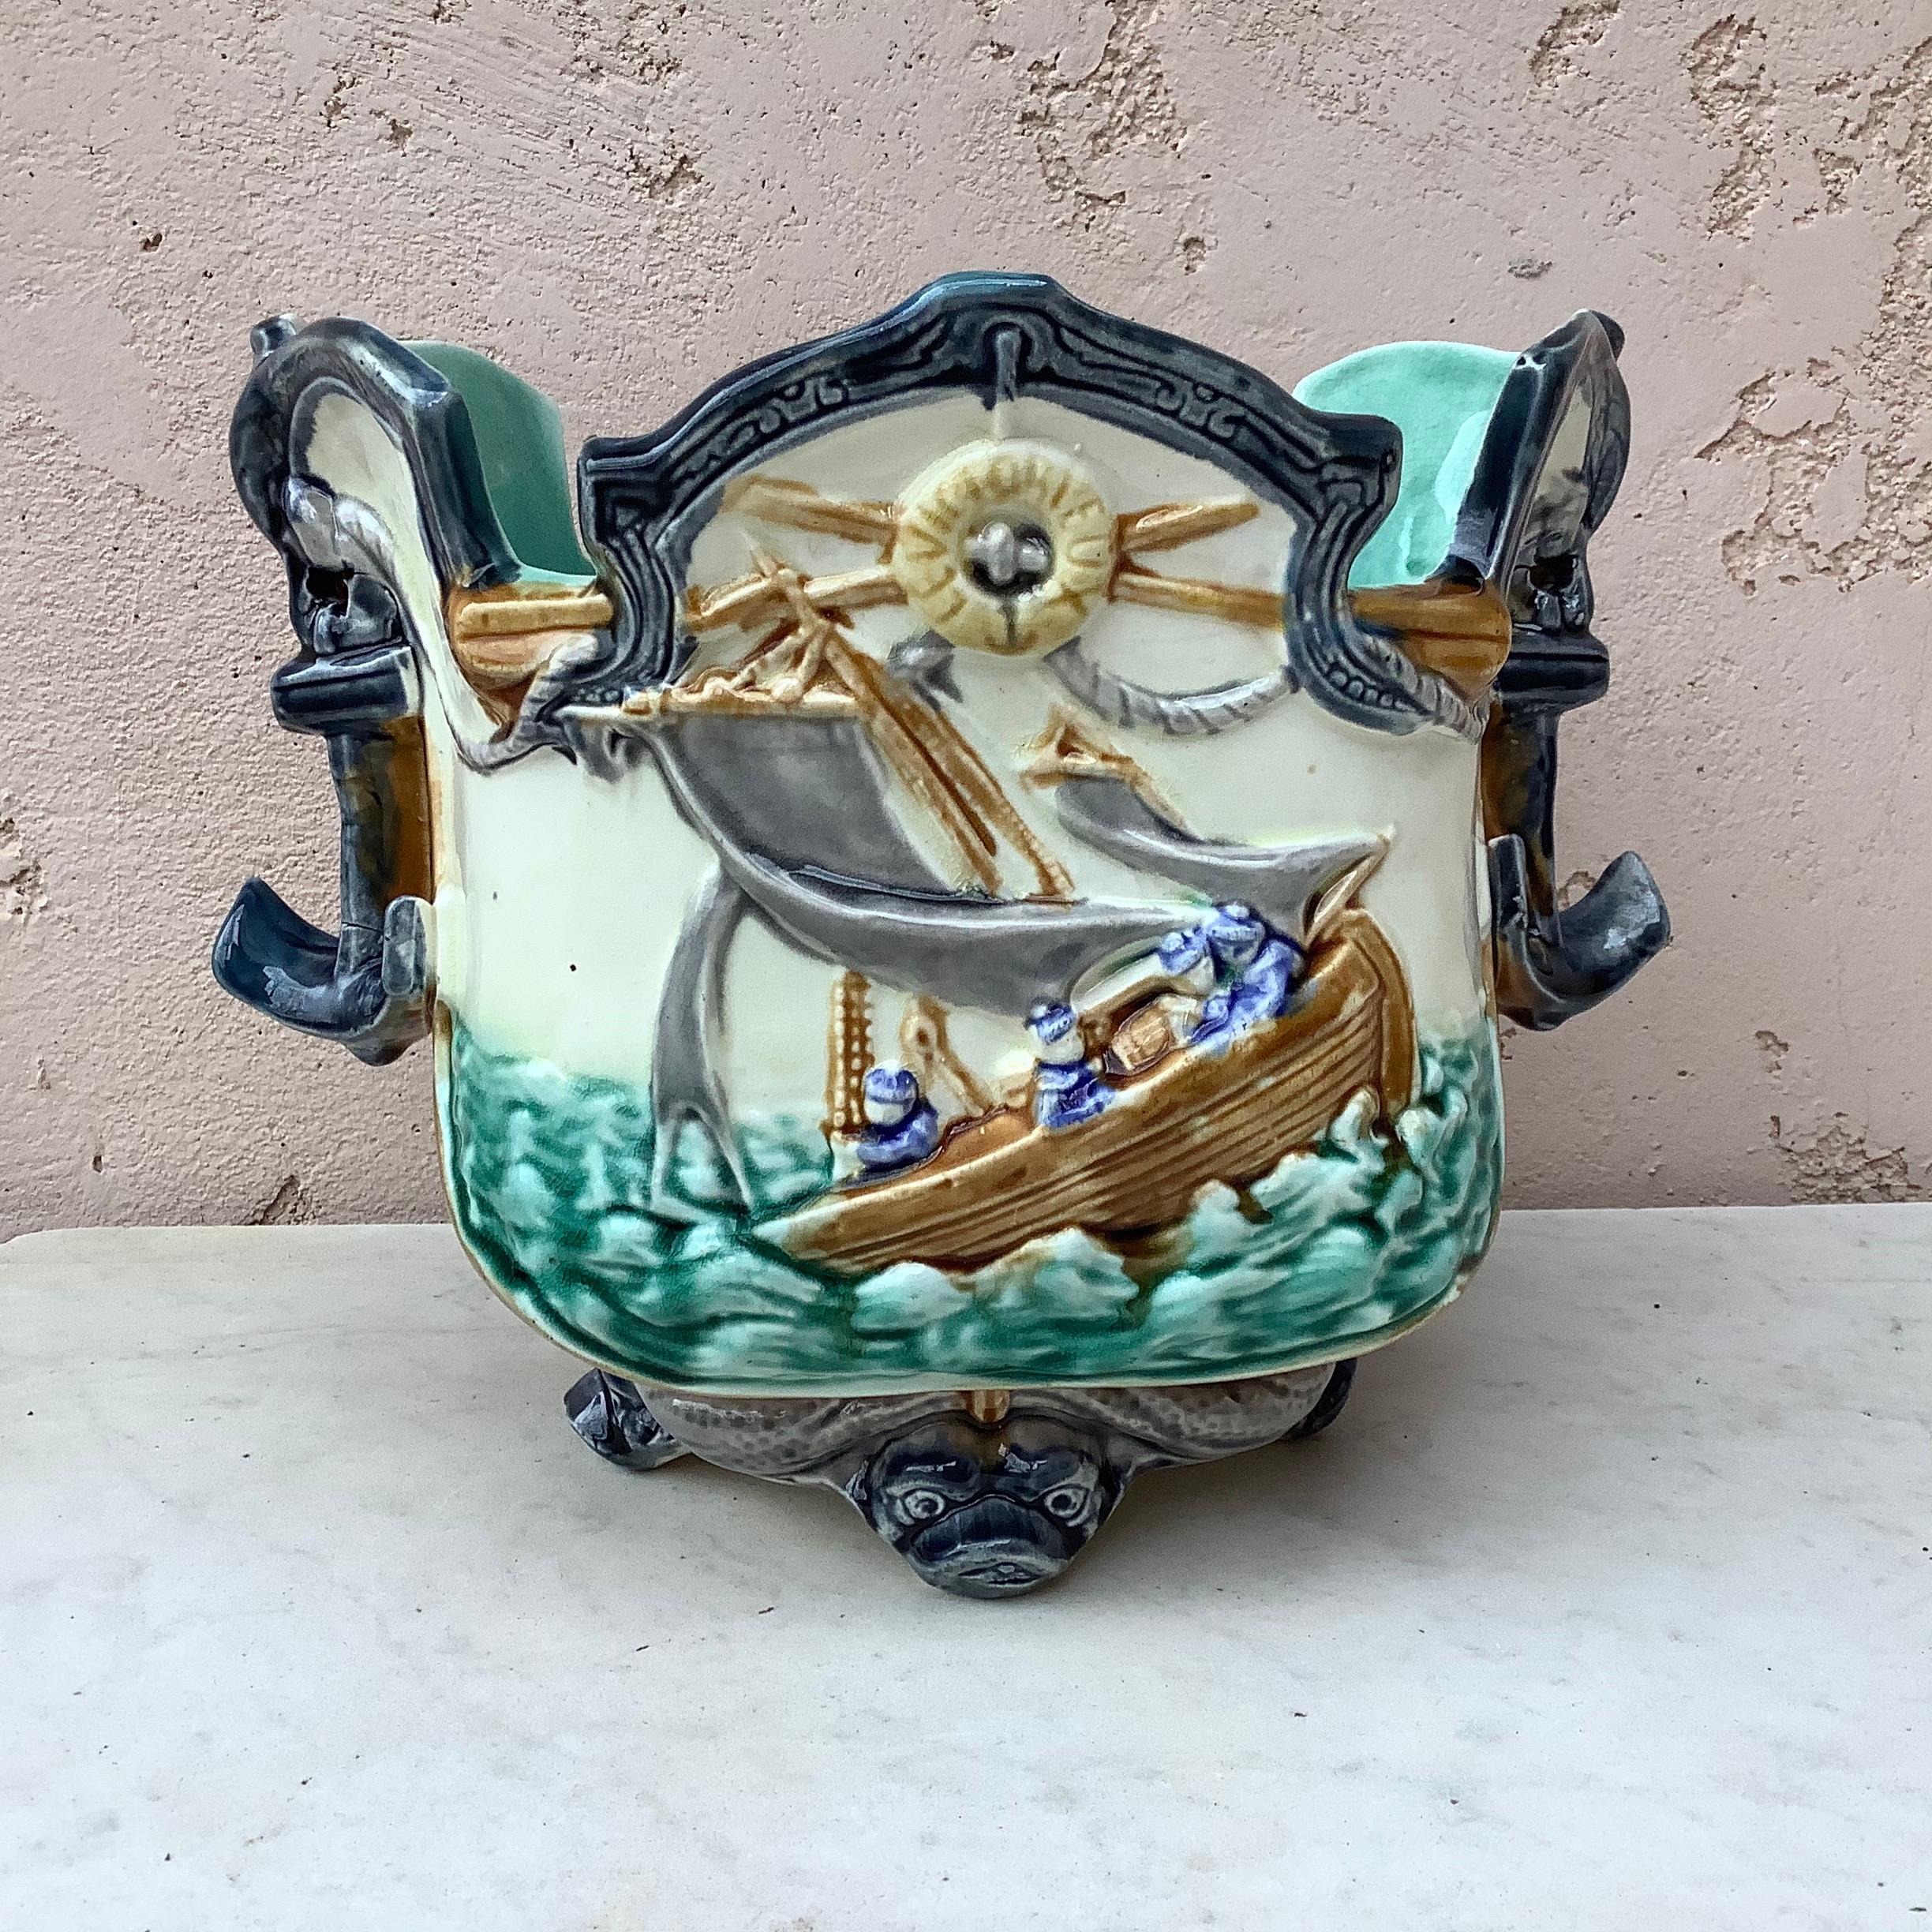 19th century Majolica nautical planter cachepot signed Onnaing, the feets are dolphins and the front is decorated with boats on the sea, the handles are anchors.